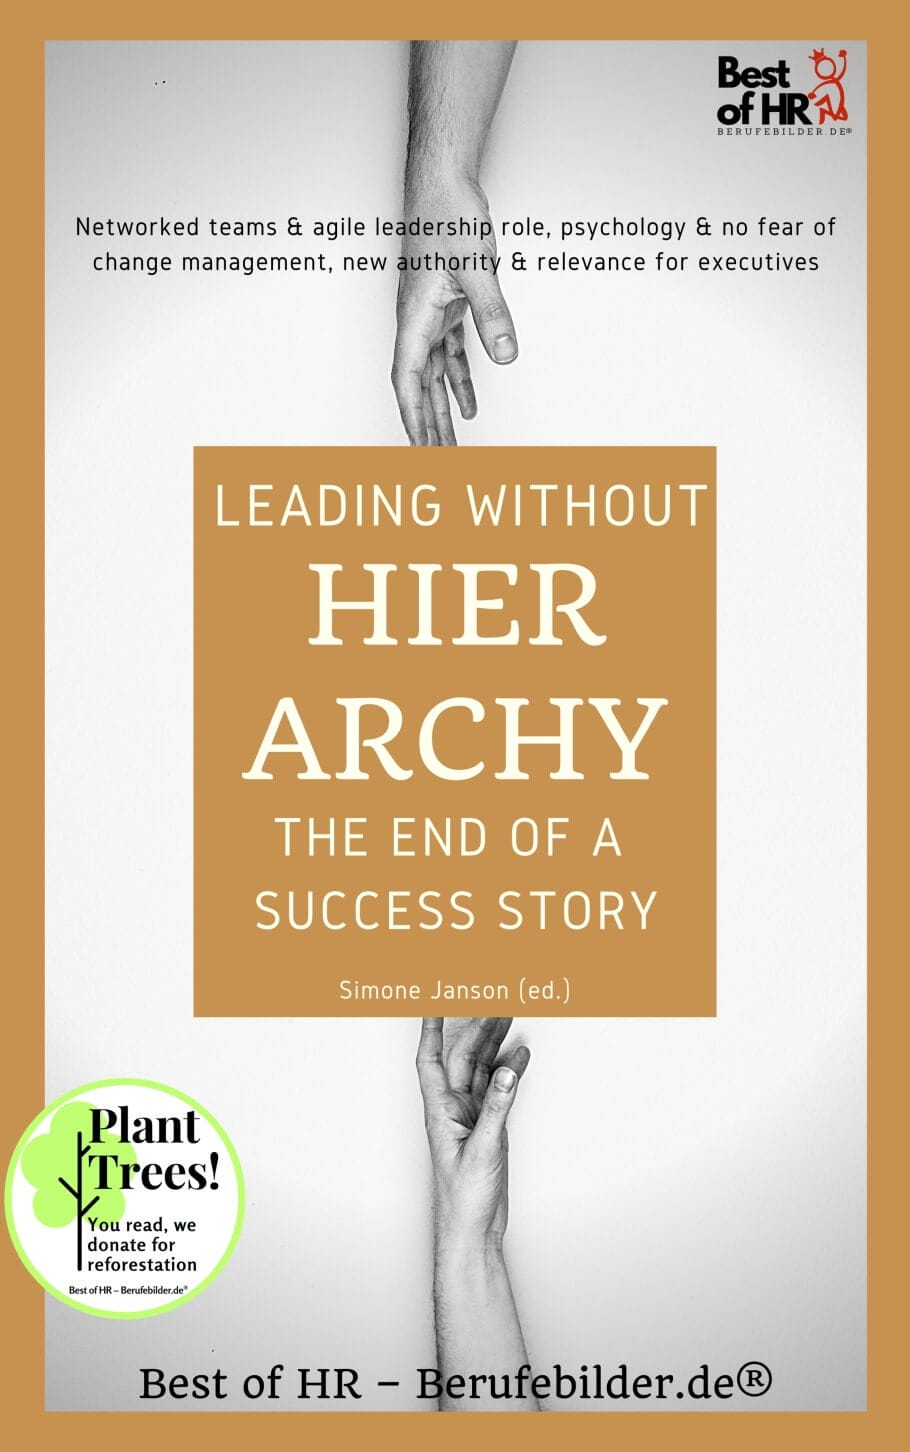 Leading without Hierarchy – the End of a Success Story (Engl. Version)